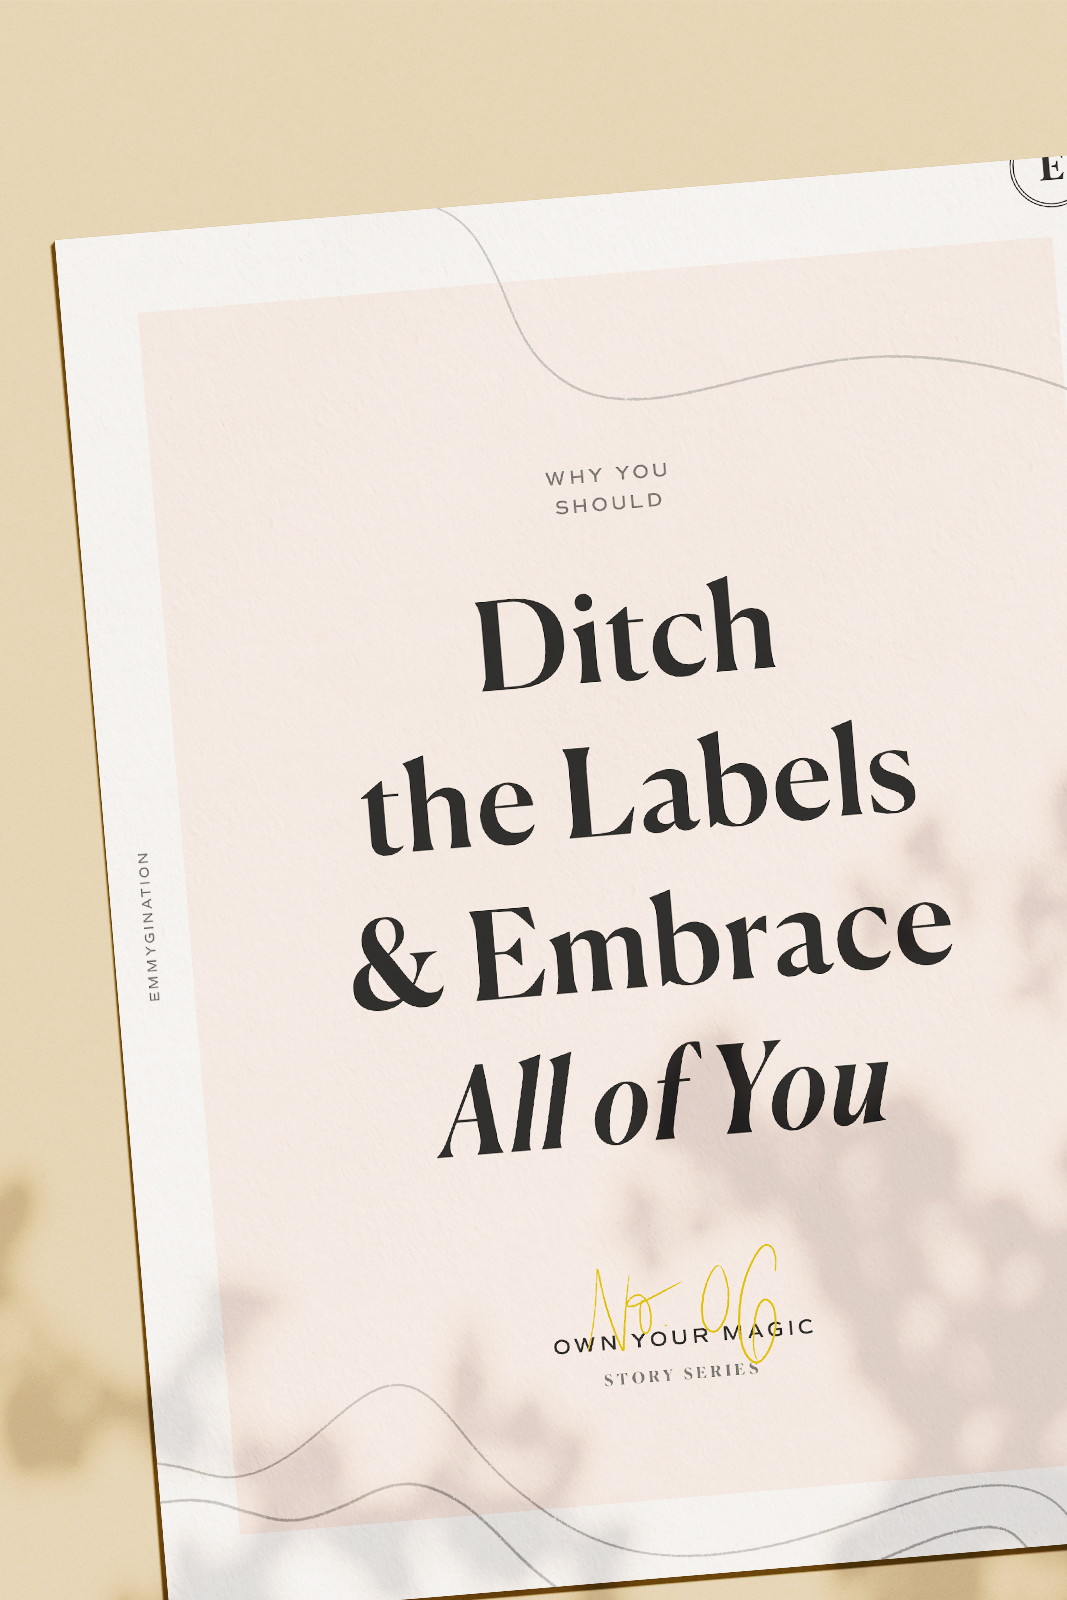 Labels tend to keep you in a box which can often be your comfort zone, it's time to own your magic and embrace all of you — It's time to ditch your labels!